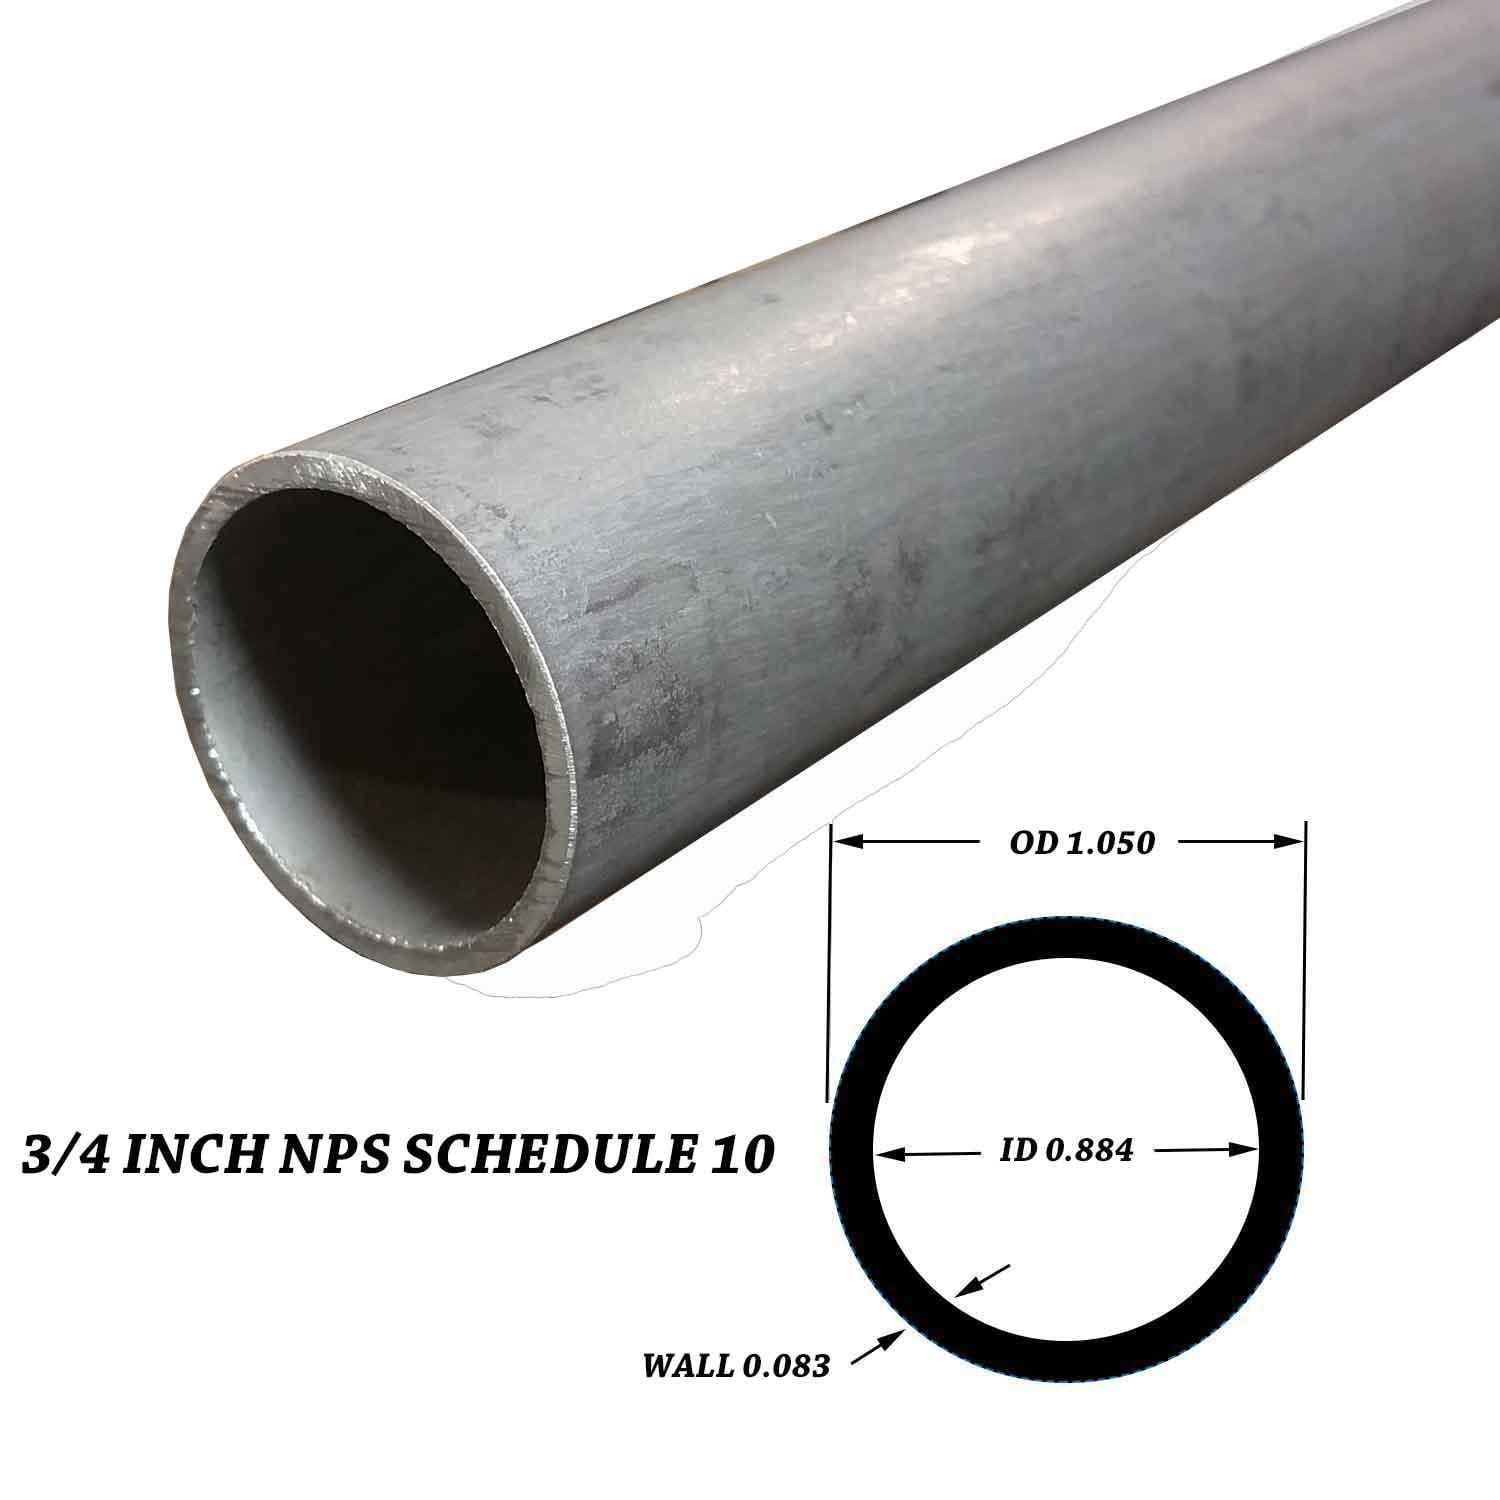 304 Stainless Steel Pipe, 3/4 inch NPS, 48 inches long, Schedule 10S (1